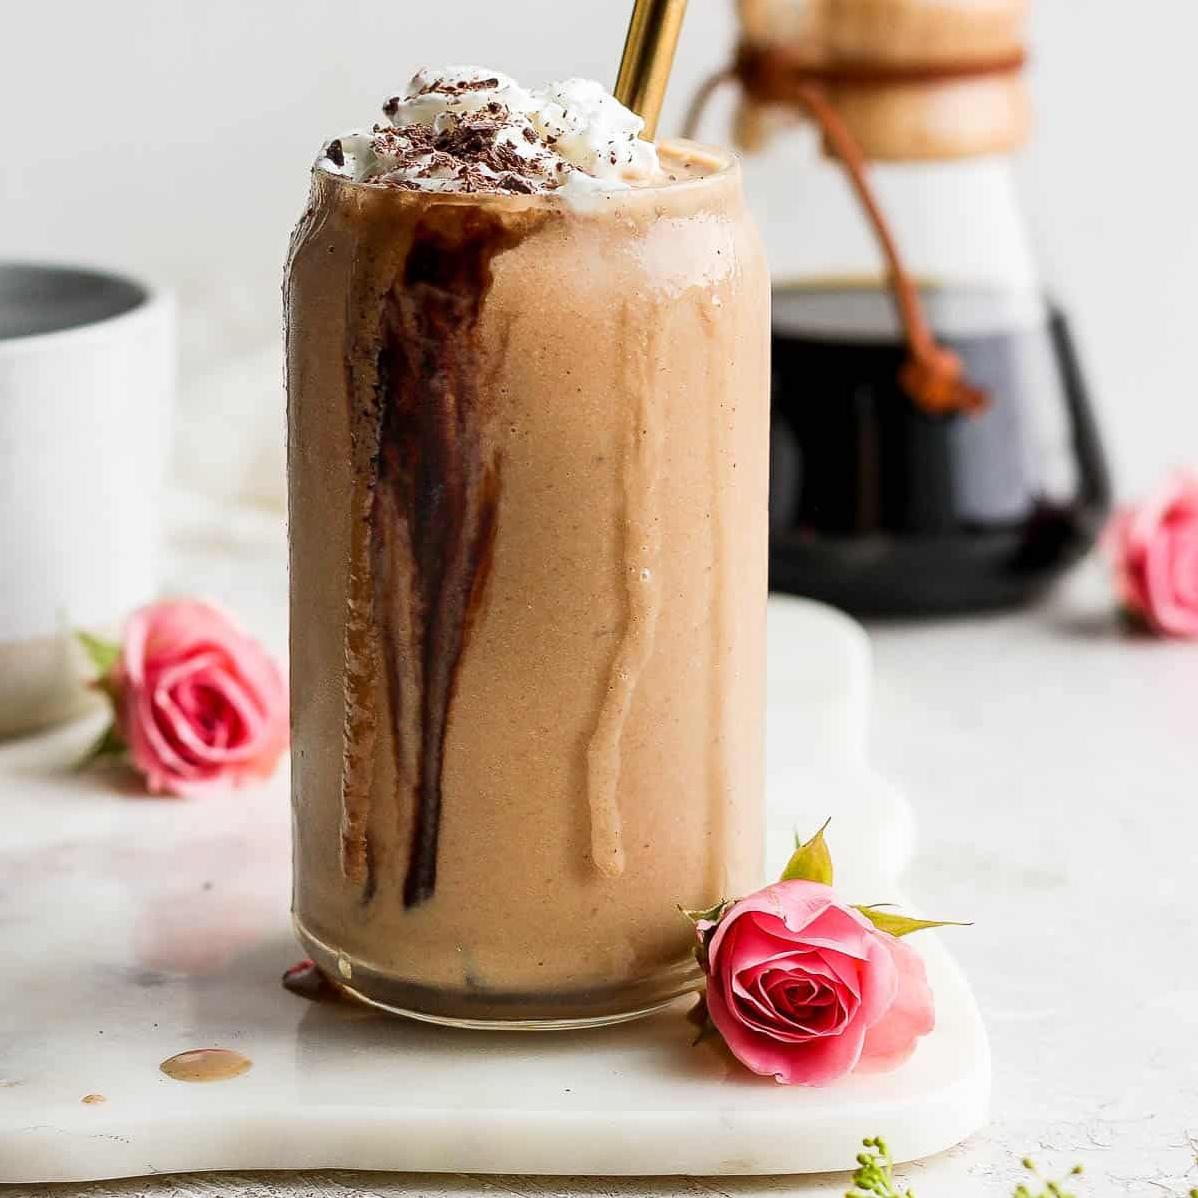  You won't believe how easy it is to make this coffee/chocolate smoothie.